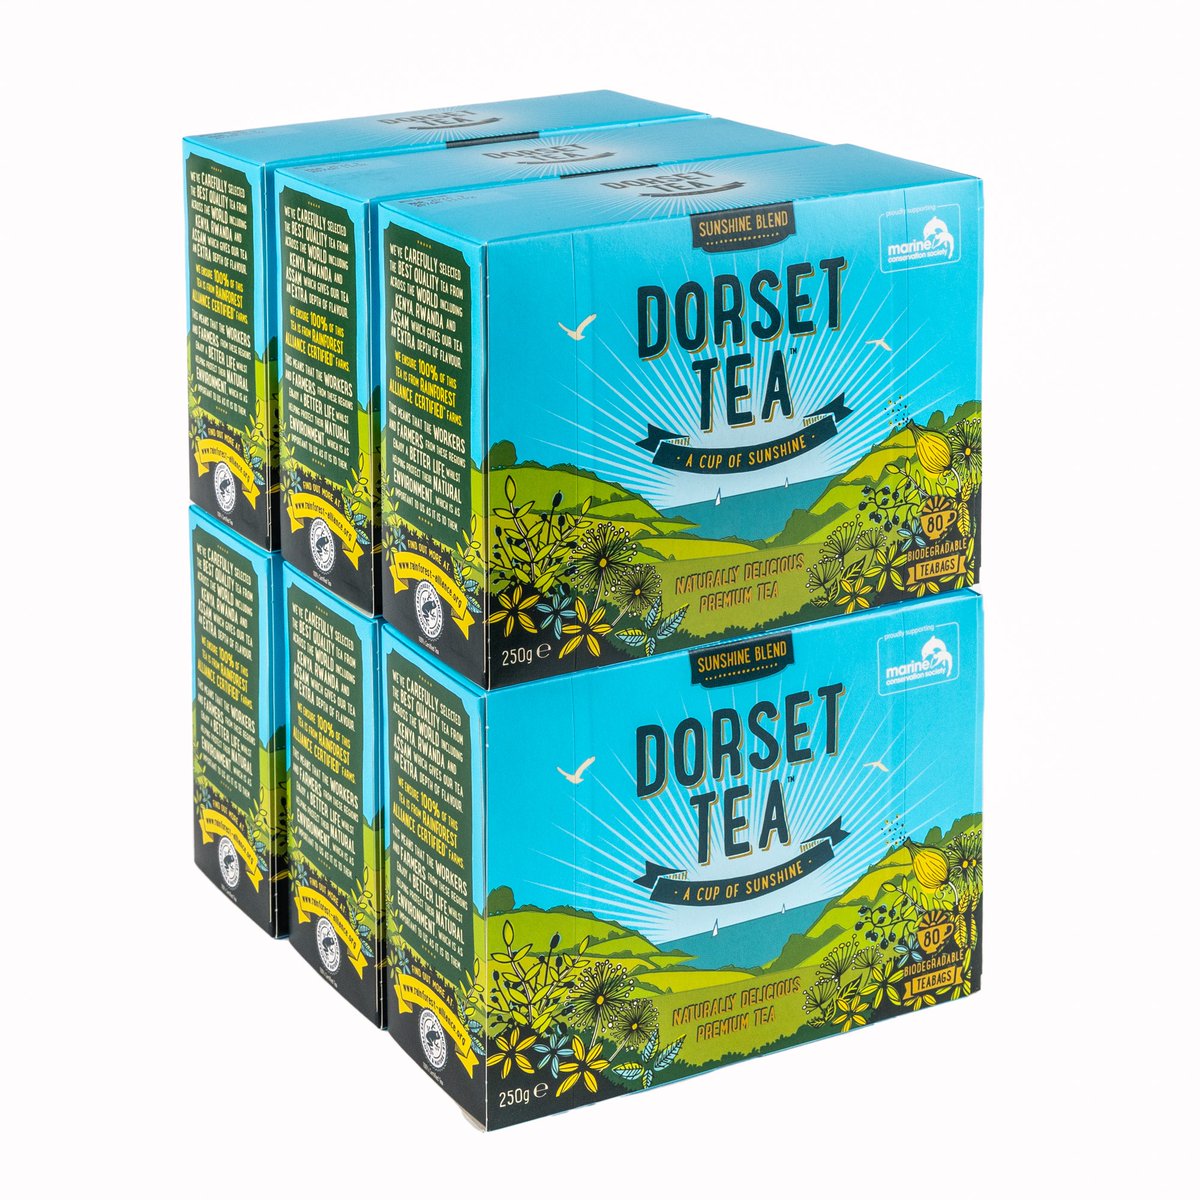 Did you know... you can now purchase cases of tea on our webshop! So if you fancy stocking up, it's now easier than ever! ow.ly/vBwL50NwkEA